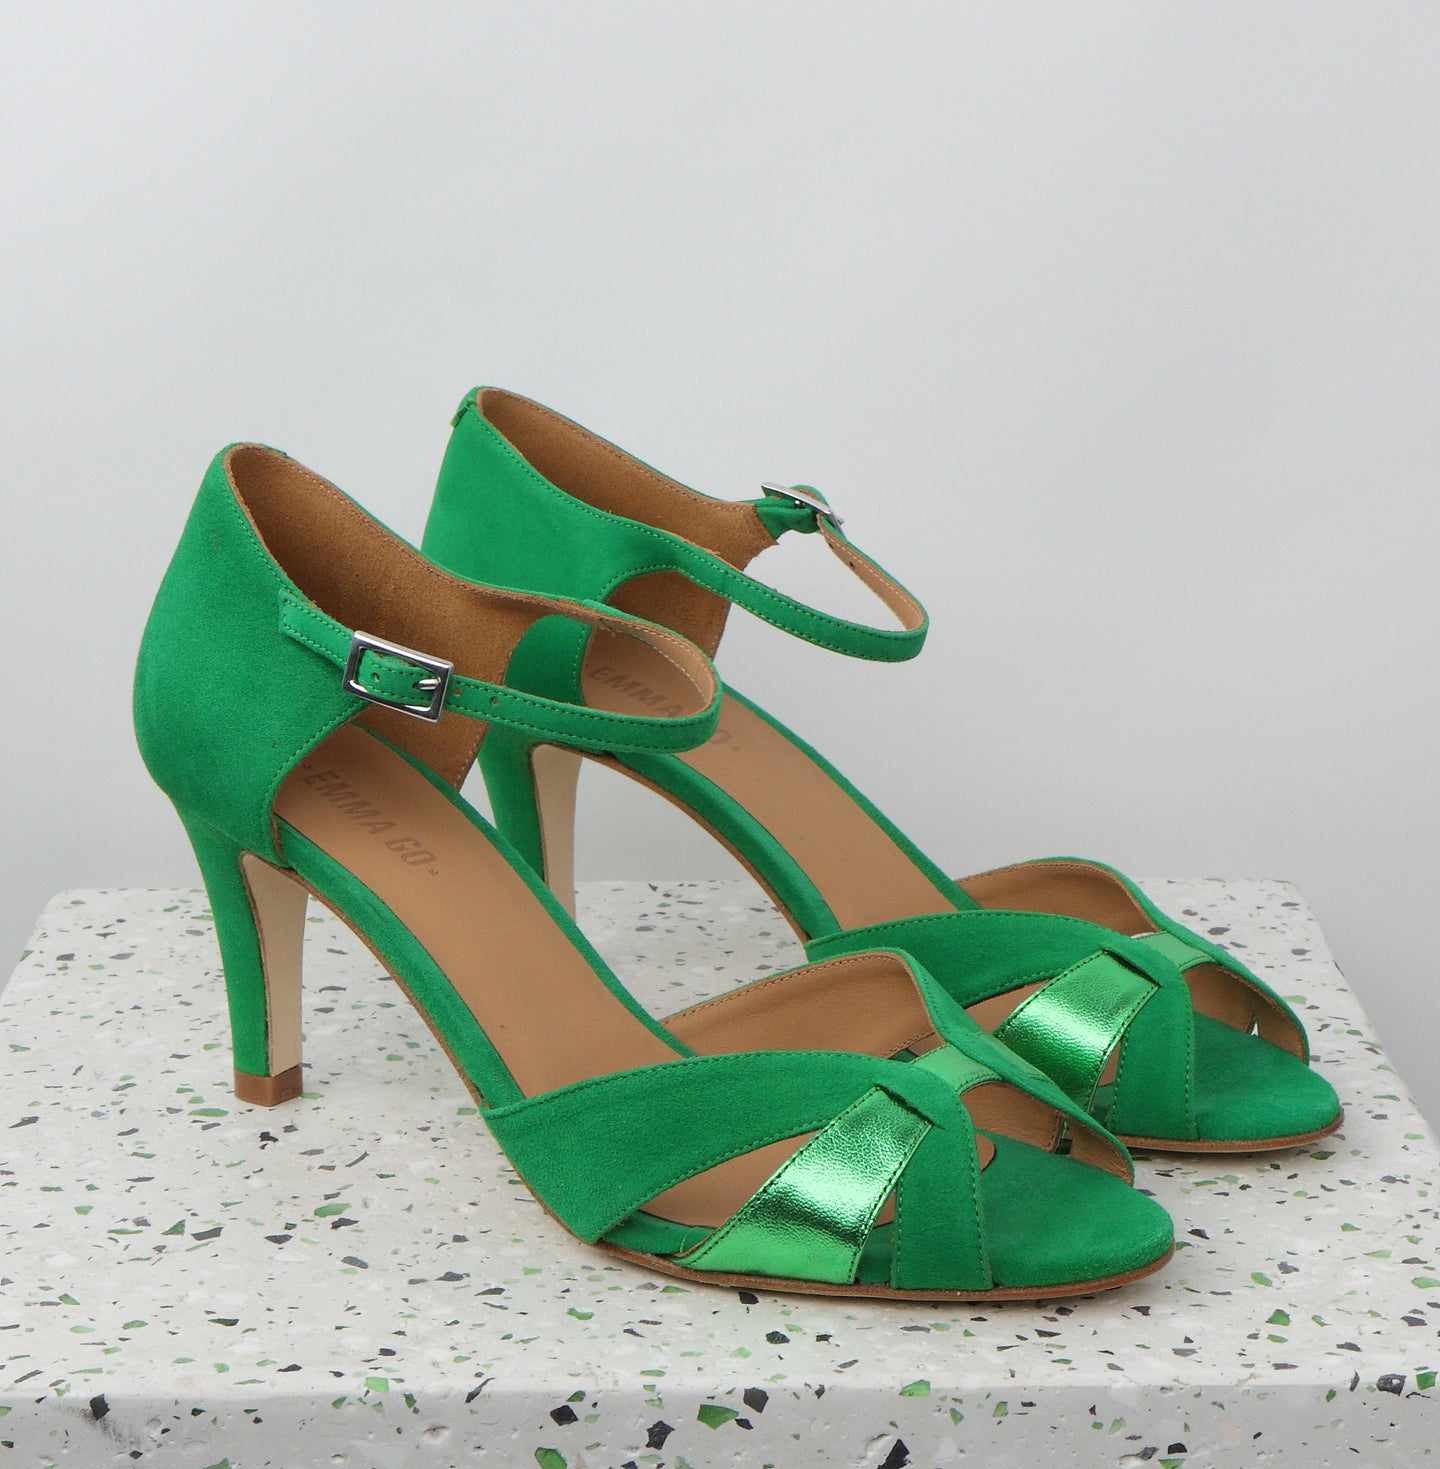 BODIL Suede Bright Green & Metal